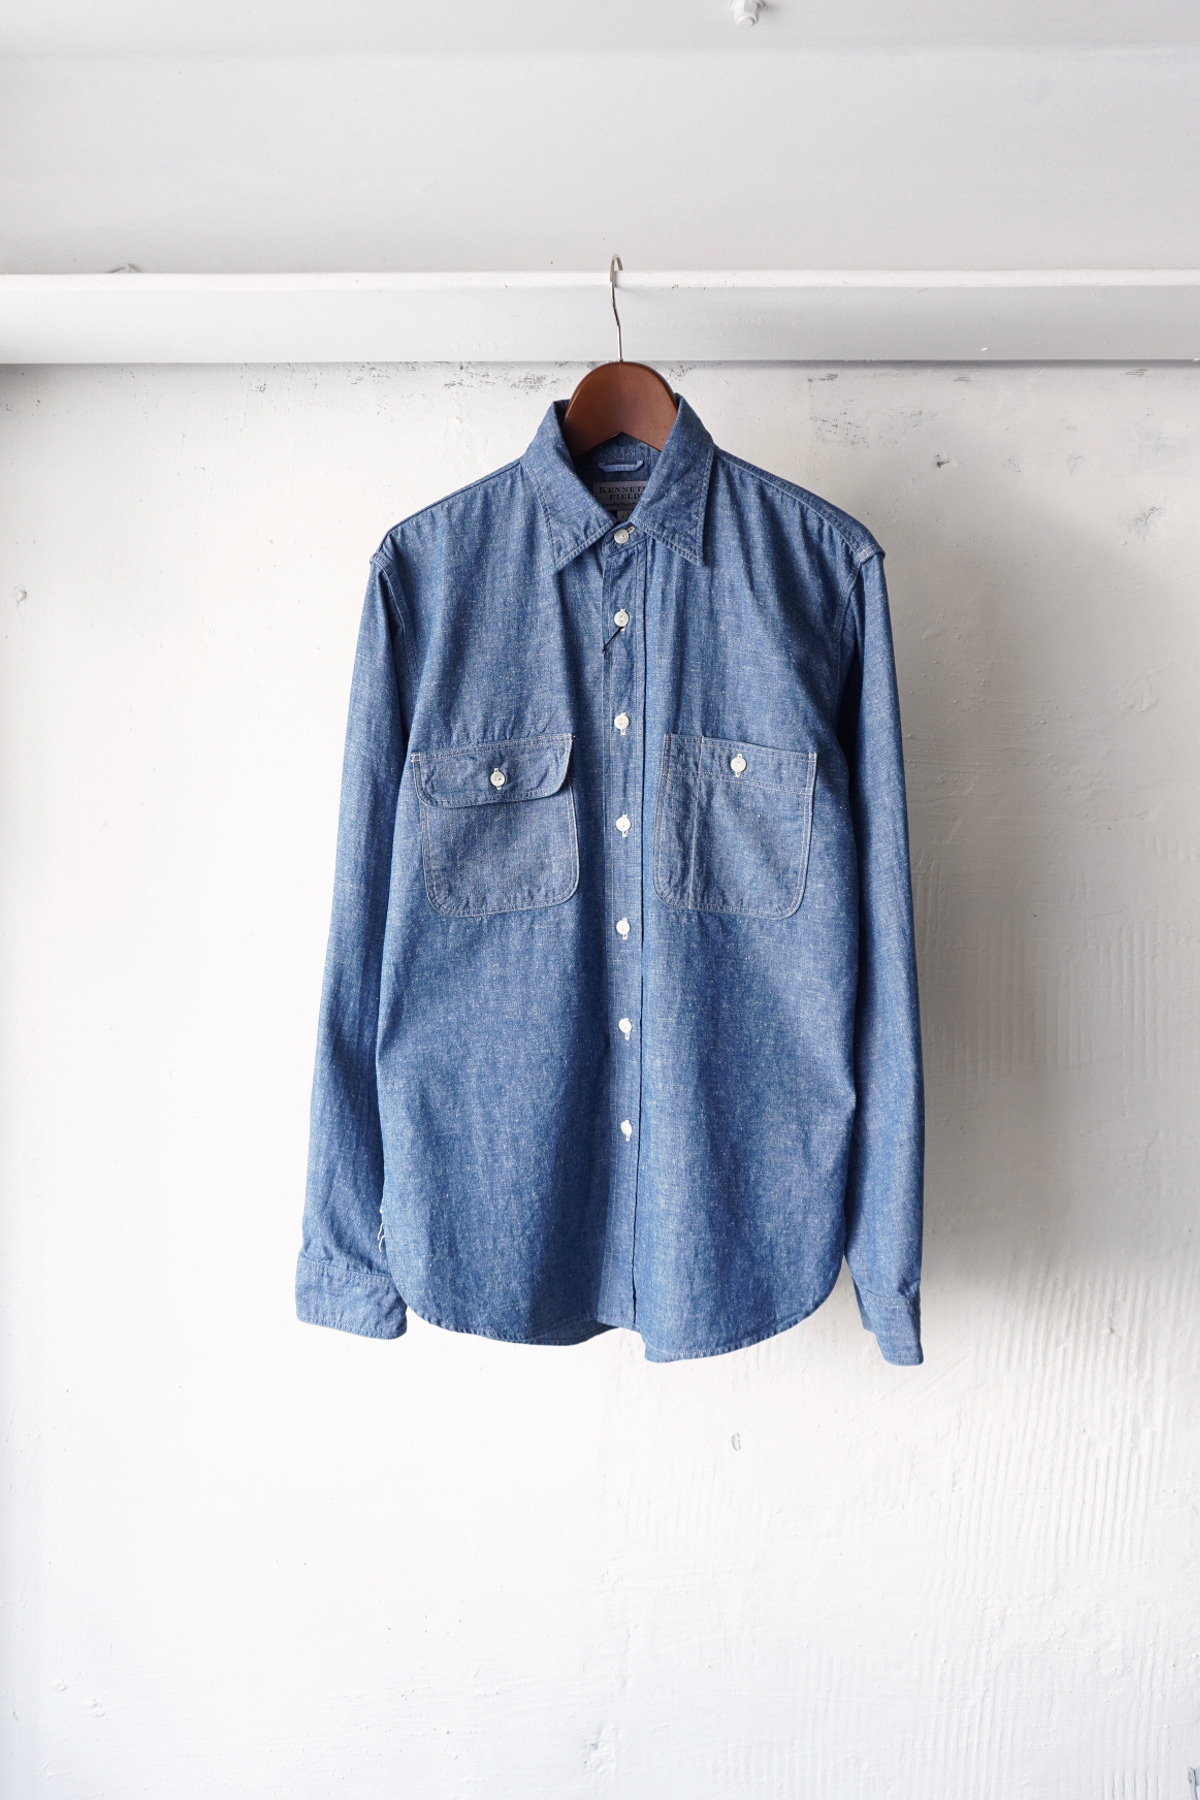 Restock! [KENNETH FIELD] 2012 Authentic Ⅱ - Chambray Blue